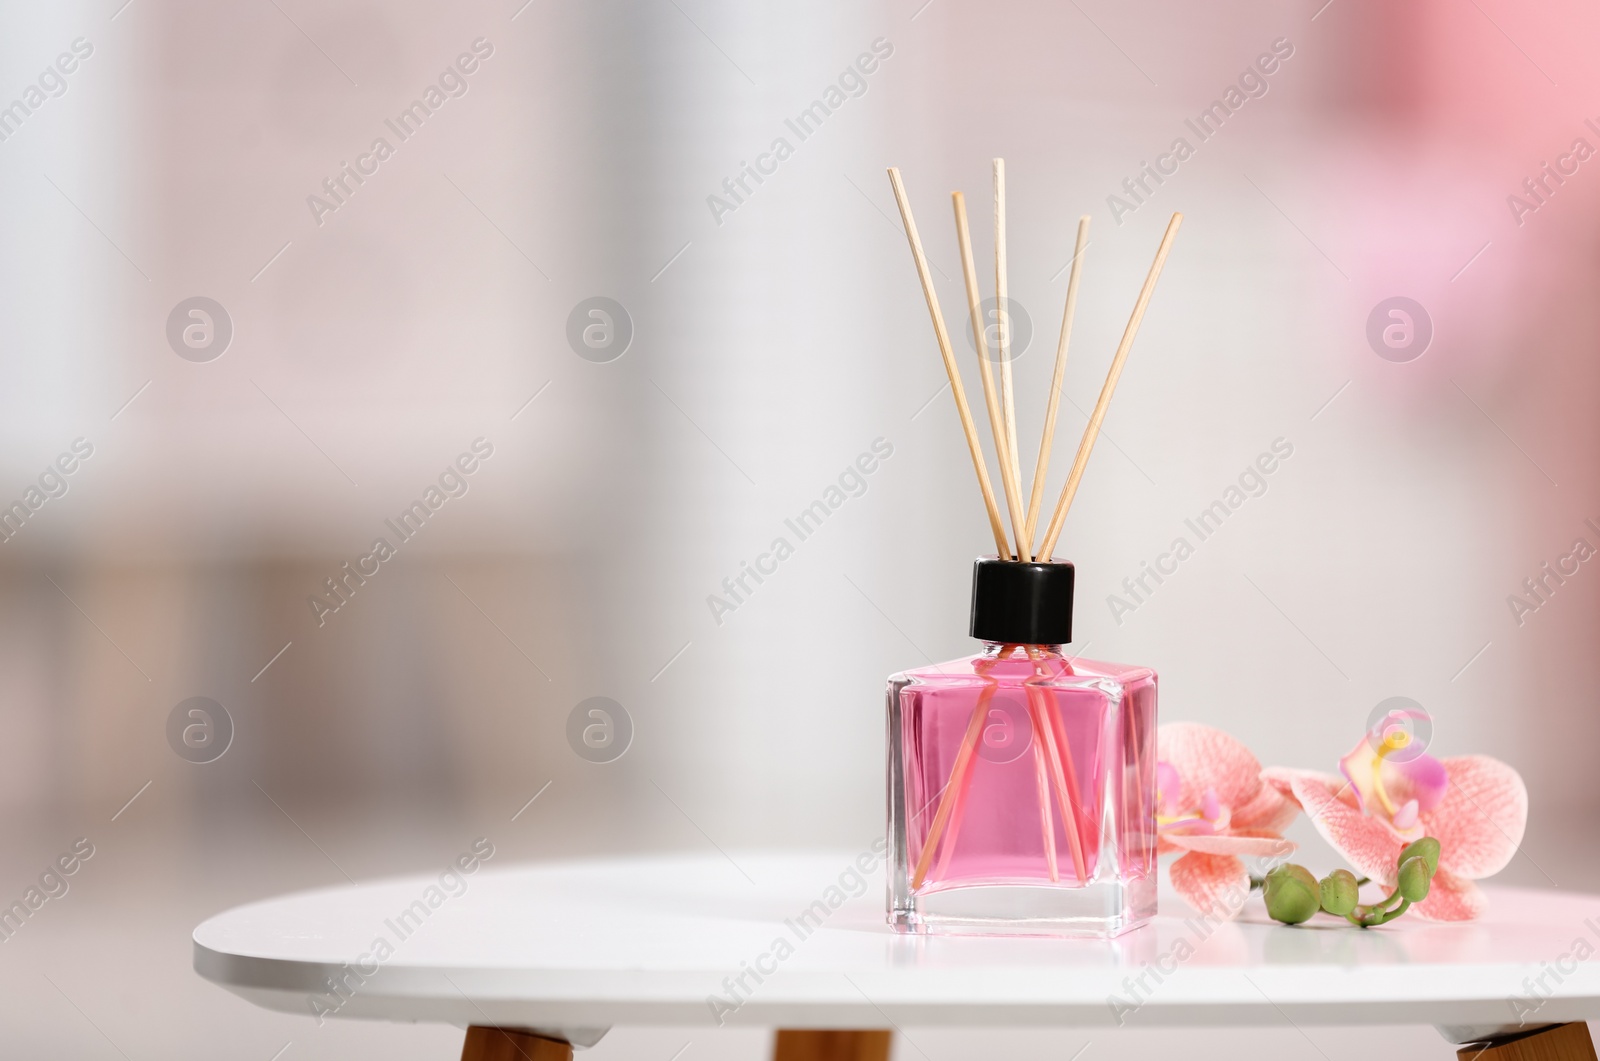 Photo of Aromatic reed air freshener and flowers on table against blurred background